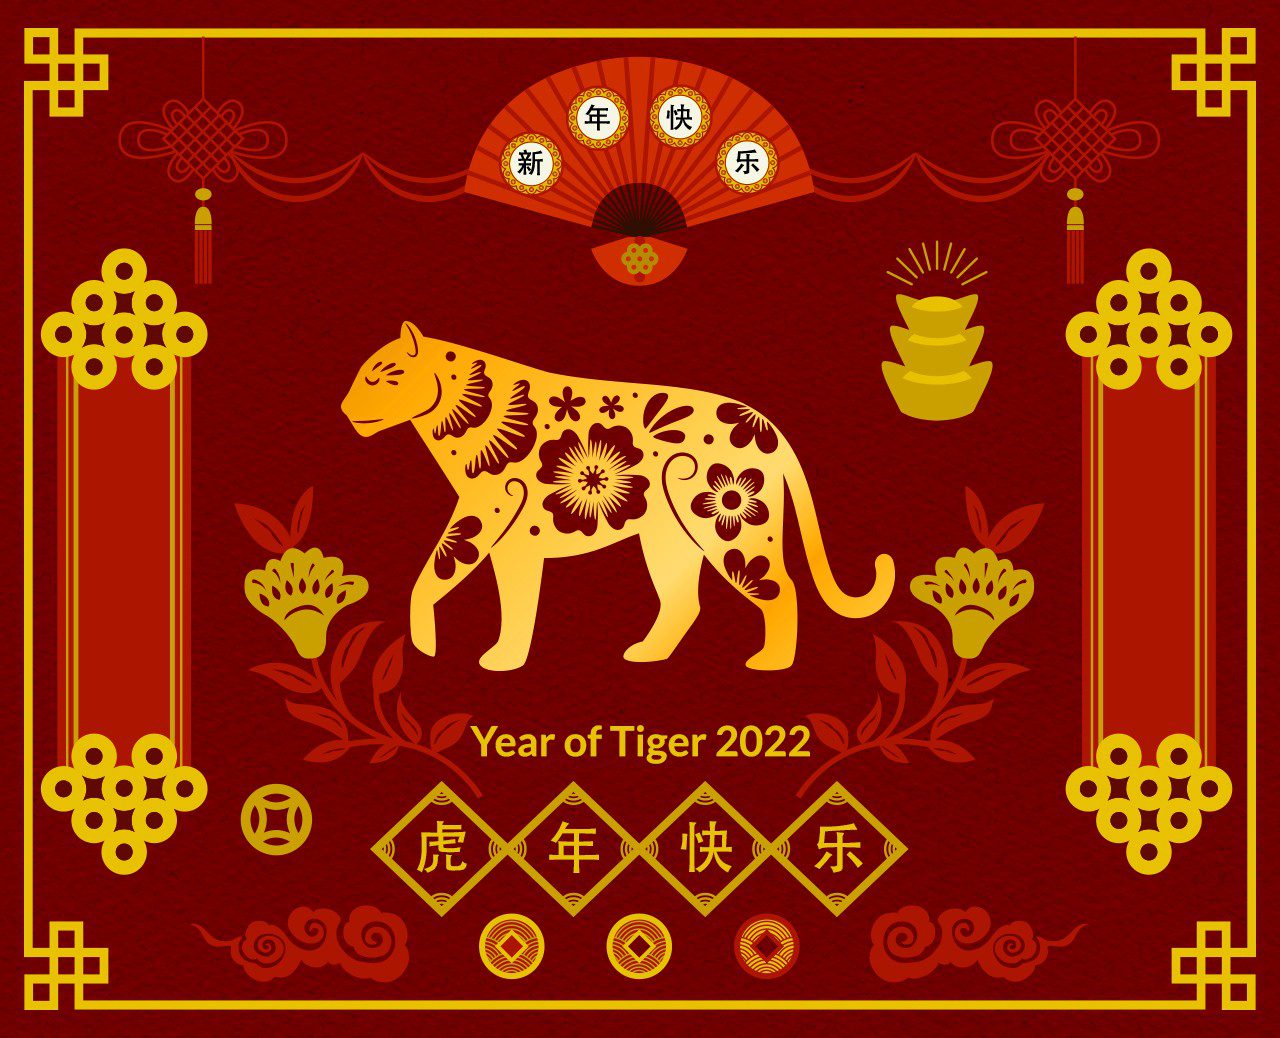 "Year of tiger 2022" gold text and drawing of tiger on red background